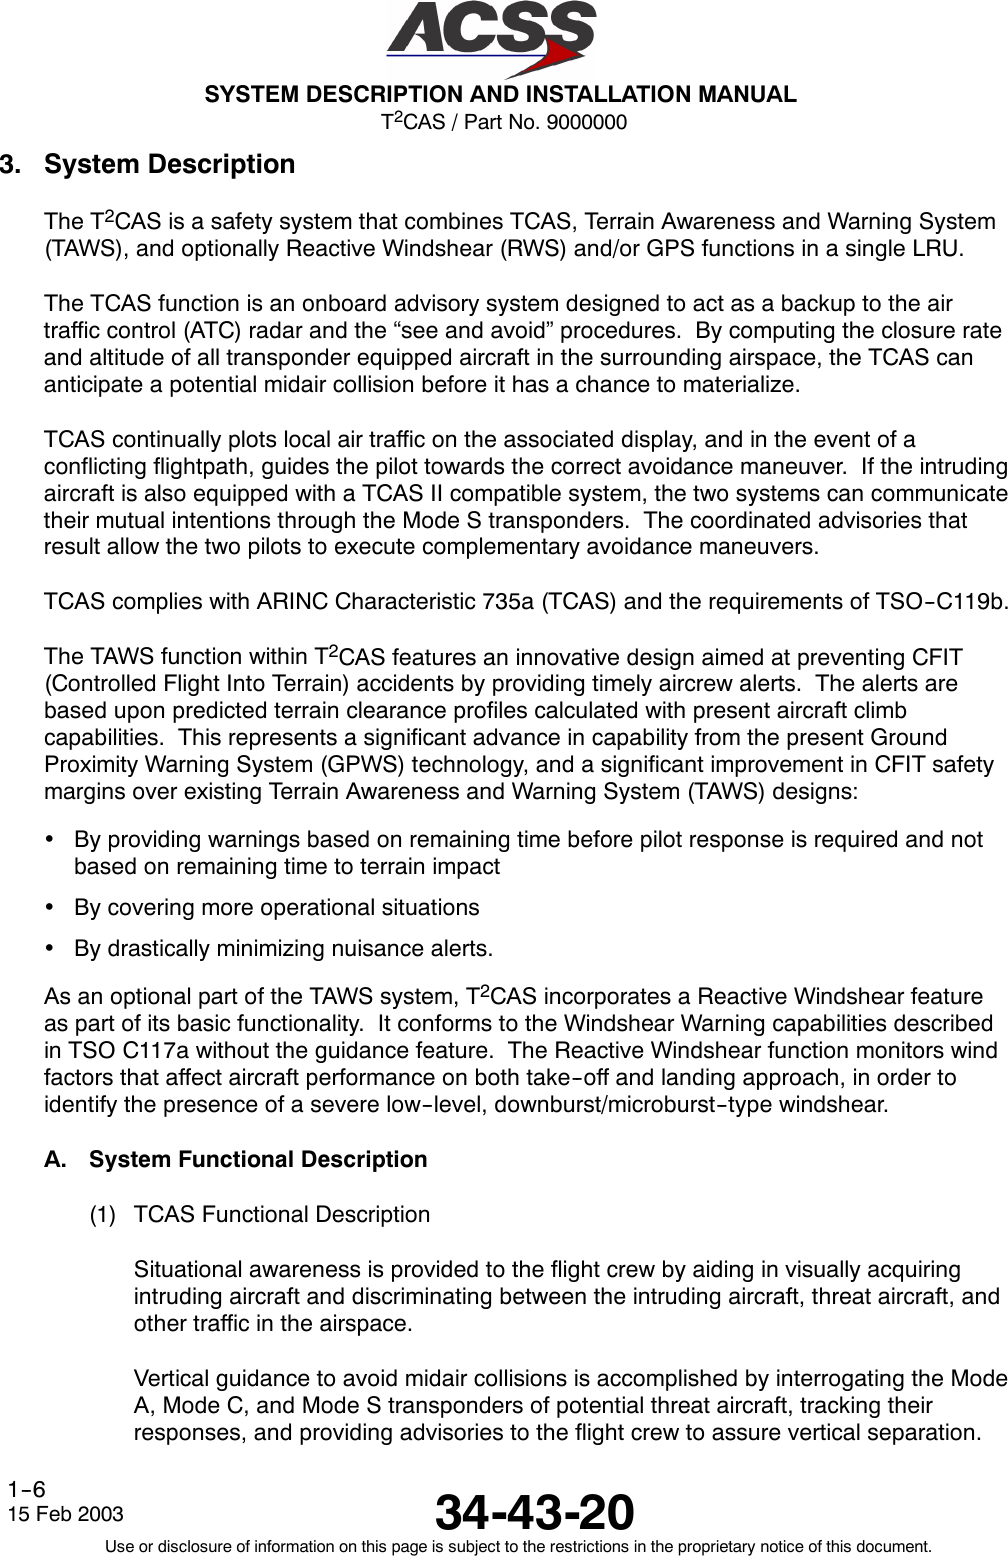 T2CAS / Part No. 9000000SYSTEM DESCRIPTION AND INSTALLATION MANUAL34-43-2015 Feb 2003Use or disclosure of information on this page is subject to the restrictions in the proprietary notice of this document.1--63. System DescriptionThe T2CAS is a safety system that combines TCAS, Terrain Awareness and Warning System(TAWS), and optionally Reactive Windshear (RWS) and/or GPS functions in a single LRU.The TCAS function is an onboard advisory system designed to act as a backup to the airtraffic control (ATC) radar and the “see and avoid” procedures. By computing the closure rateand altitude of all transponder equipped aircraft in the surrounding airspace, the TCAS cananticipate a potential midair collision before it has a chance to materialize.TCAS continually plots local air traffic on the associated display, and in the event of aconflicting flightpath, guides the pilot towards the correct avoidance maneuver. If the intrudingaircraft is also equipped with a TCAS II compatible system, the two systems can communicatetheir mutual intentions through the Mode S transponders. The coordinated advisories thatresult allow the two pilots to execute complementary avoidance maneuvers.TCAS complies with ARINC Characteristic 735a (TCAS) and the requirements of TSO--C119b.The TAWS function within T2CAS features an innovative design aimed at preventing CFIT(Controlled Flight Into Terrain) accidents by providing timely aircrew alerts. The alerts arebased upon predicted terrain clearance profiles calculated with present aircraft climbcapabilities. This represents a significant advance in capability from the present GroundProximity Warning System (GPWS) technology, and a significant improvement in CFIT safetymargins over existing Terrain Awareness and Warning System (TAWS) designs:•By providing warnings based on remaining time before pilot response is required and notbased on remaining time to terrain impact•By covering more operational situations•By drastically minimizing nuisance alerts.As an optional part of the TAWS system, T2CAS incorporates a Reactive Windshear featureas part of its basic functionality. It conforms to the Windshear Warning capabilities describedin TSO C117a without the guidance feature. The Reactive Windshear function monitors windfactors that affect aircraft performance on both take--off and landing approach, in order toidentify the presence of a severe low--level, downburst/microburst--type windshear.A. System Functional Description(1) TCAS Functional DescriptionSituational awareness is provided to the flight crew by aiding in visually acquiringintruding aircraft and discriminating between the intruding aircraft, threat aircraft, andother traffic in the airspace.Vertical guidance to avoid midair collisions is accomplished by interrogating the ModeA, Mode C, and Mode S transponders of potential threat aircraft, tracking theirresponses, and providing advisories to the flight crew to assure vertical separation.